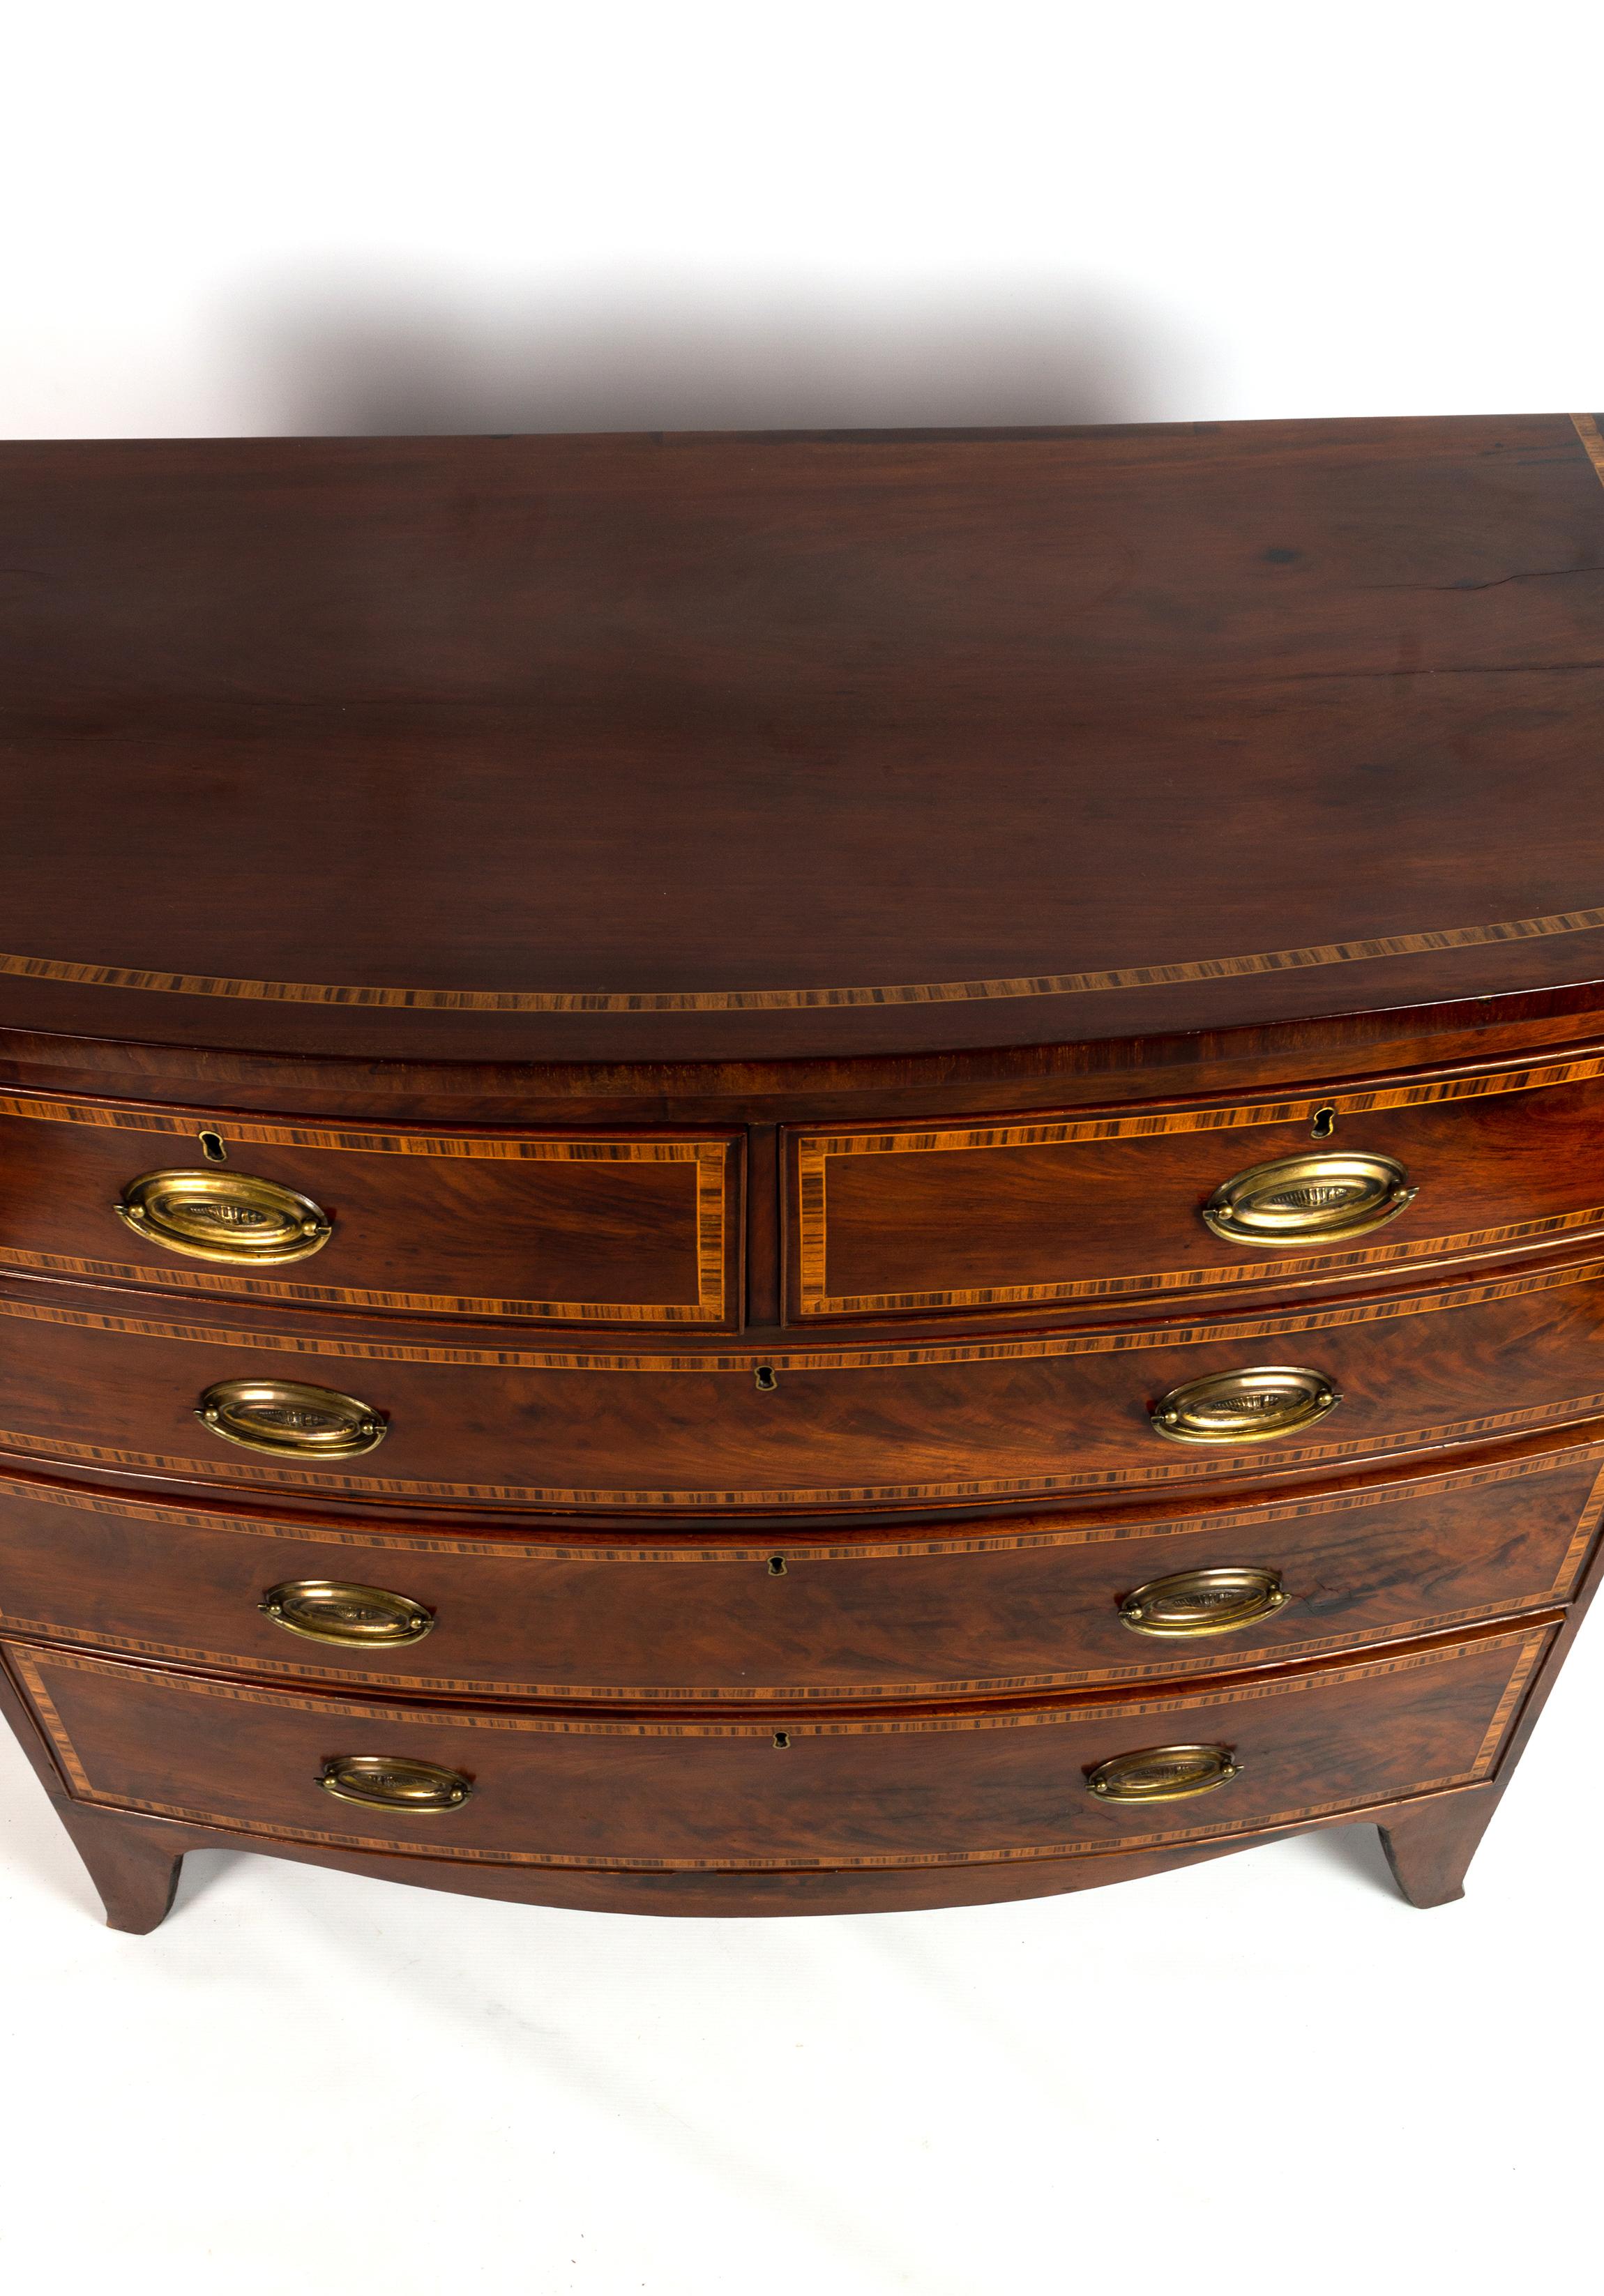 A regency mahogany and line inlaid bow front chest of drawers, early 19th century (c.1815)

A regency mahogany and line inlaid bow front chest of drawers, early 19th century, with two short over three long graduated drawers, inlaid with rosewood,